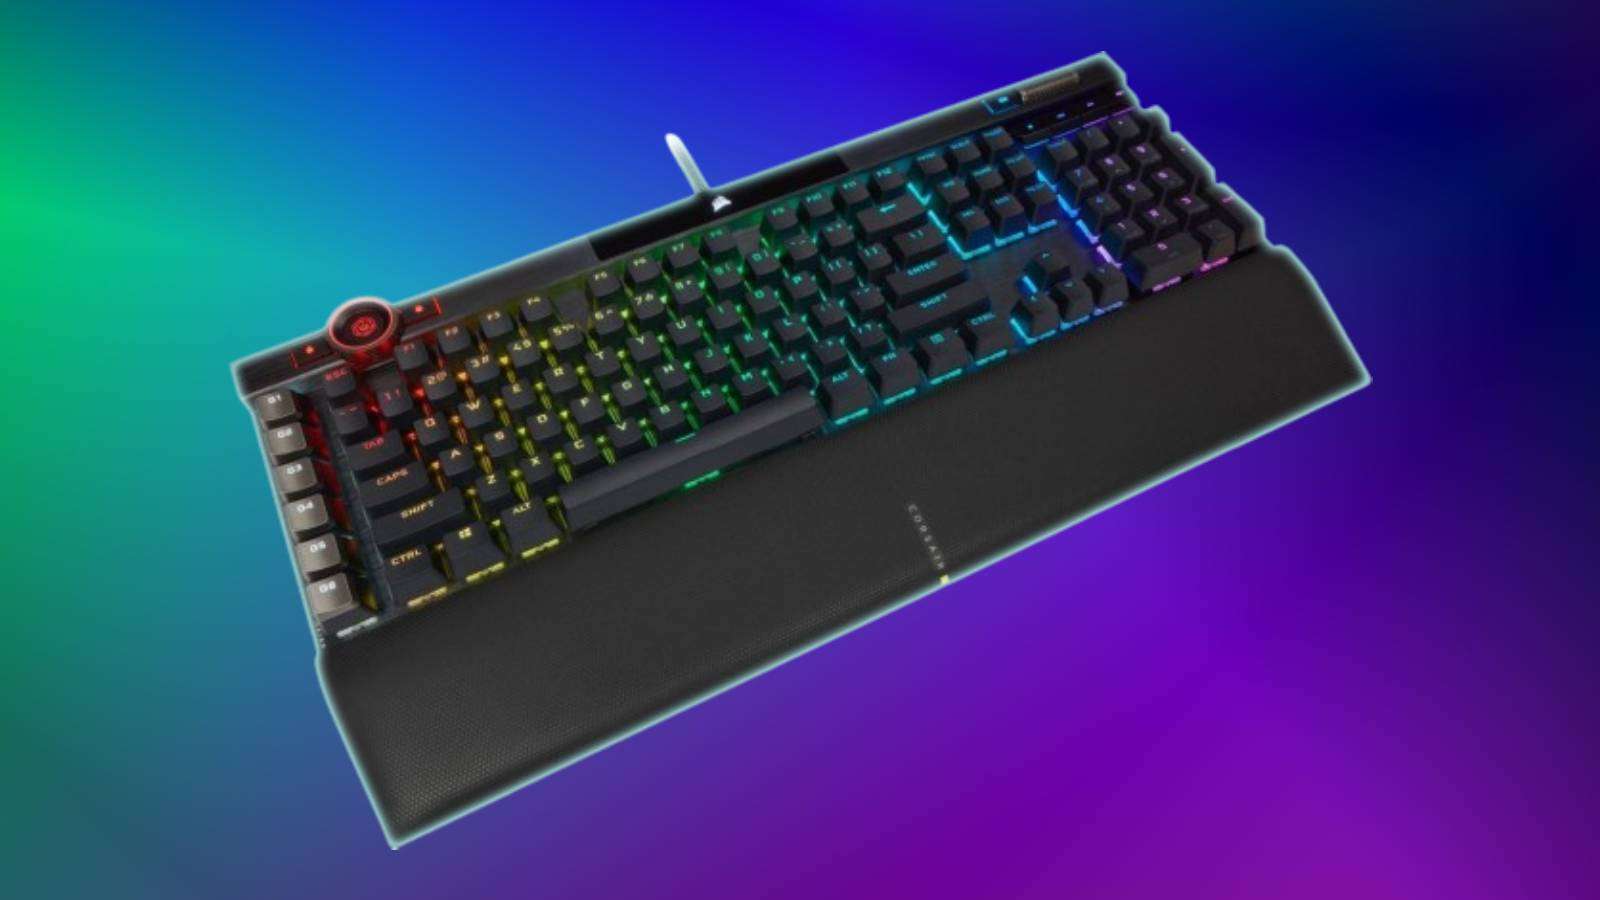 Save $50 on this Corsair keyboard with Elgato Stream Deck integration ...